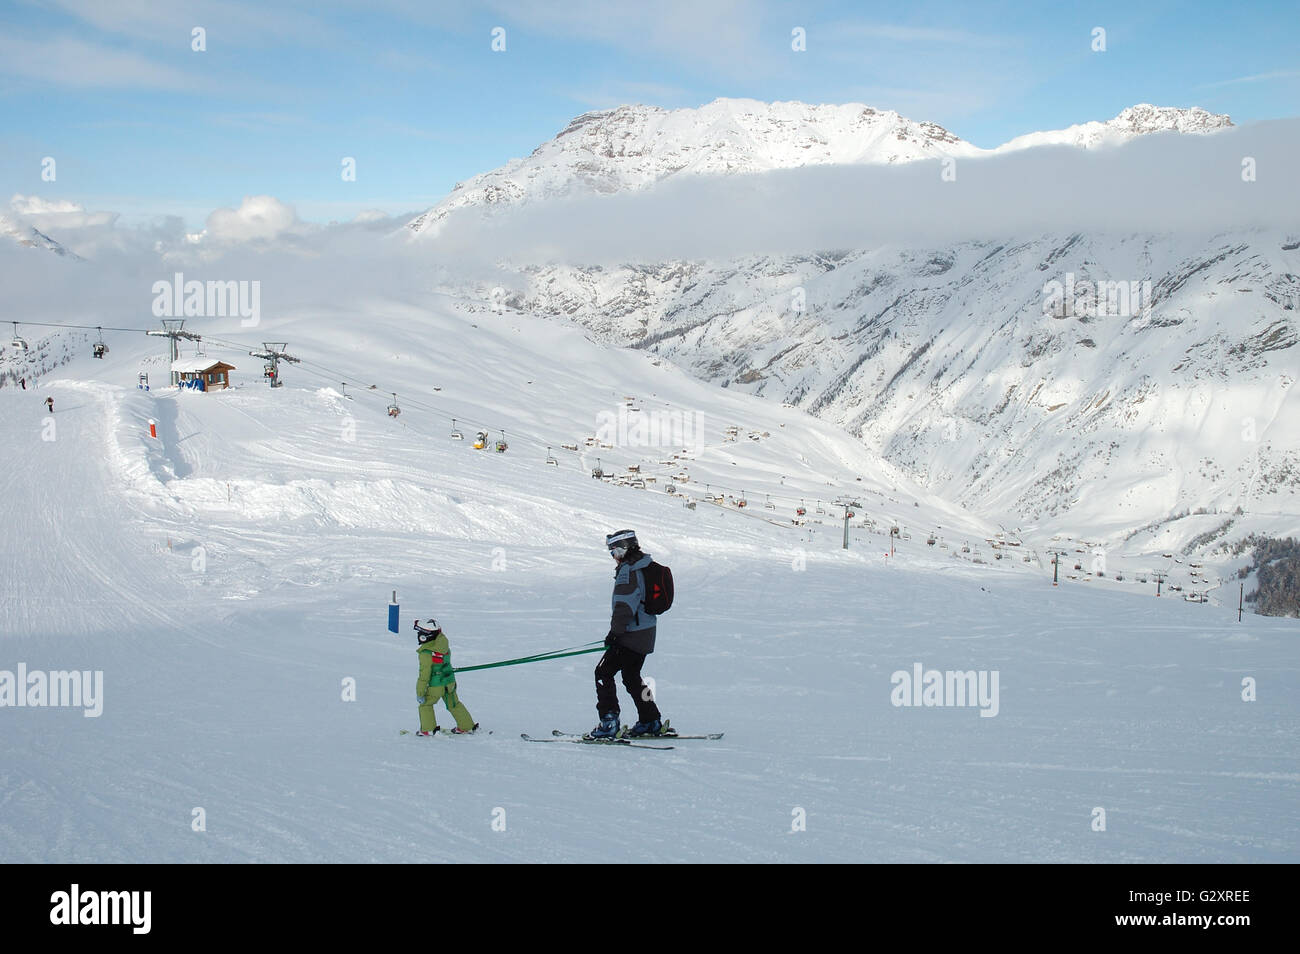 LIVIGNO, ITALY - DECEMBER 17: Unidentified skiers (little girl and woman) skiing on slope in Livigno Italy 17.12.2008 Stock Photo